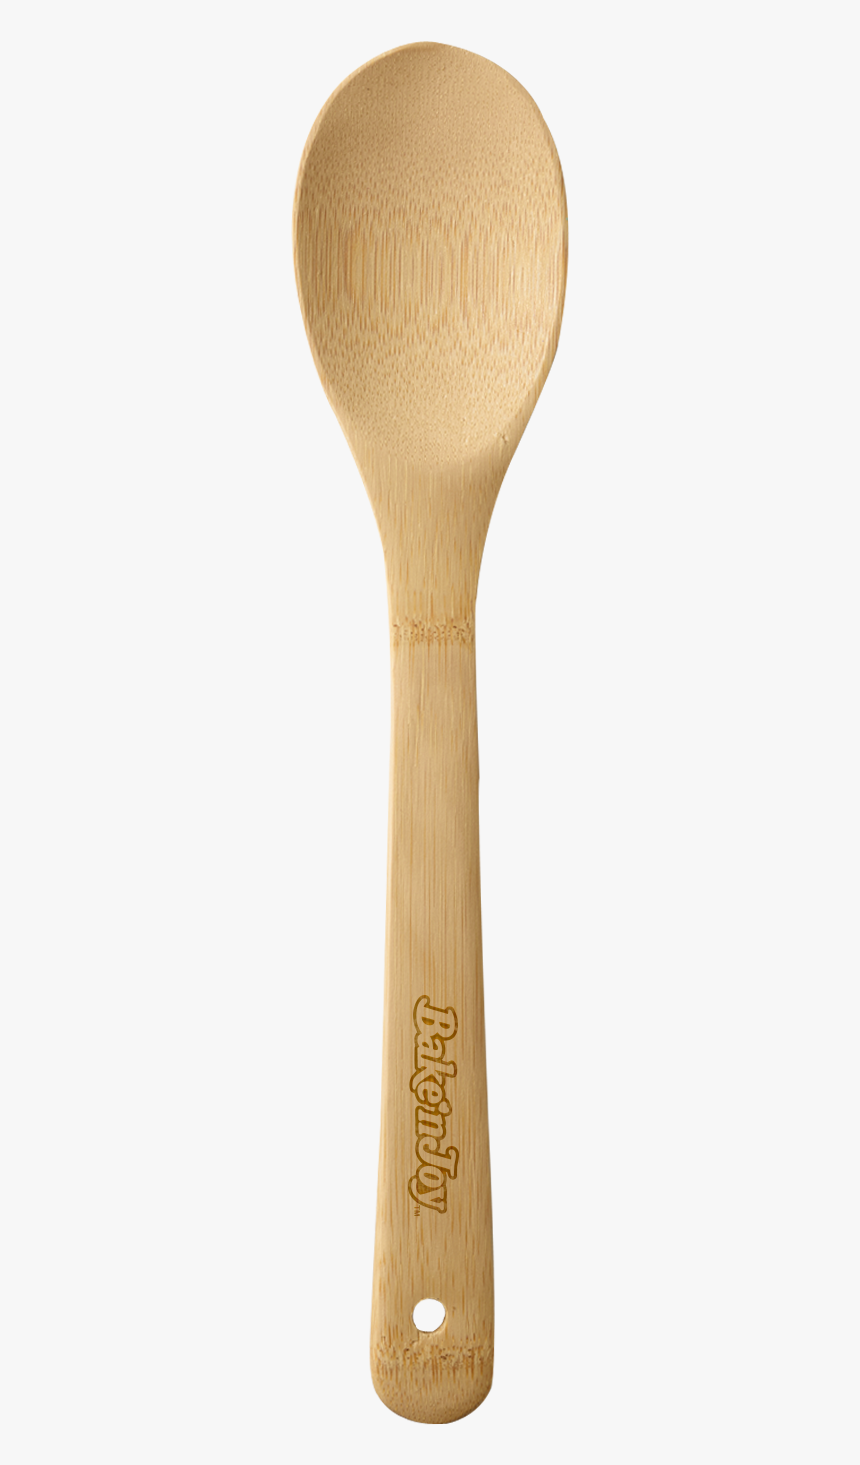 Bamboo Spoon - Wooden Spoon, HD Png Download, Free Download